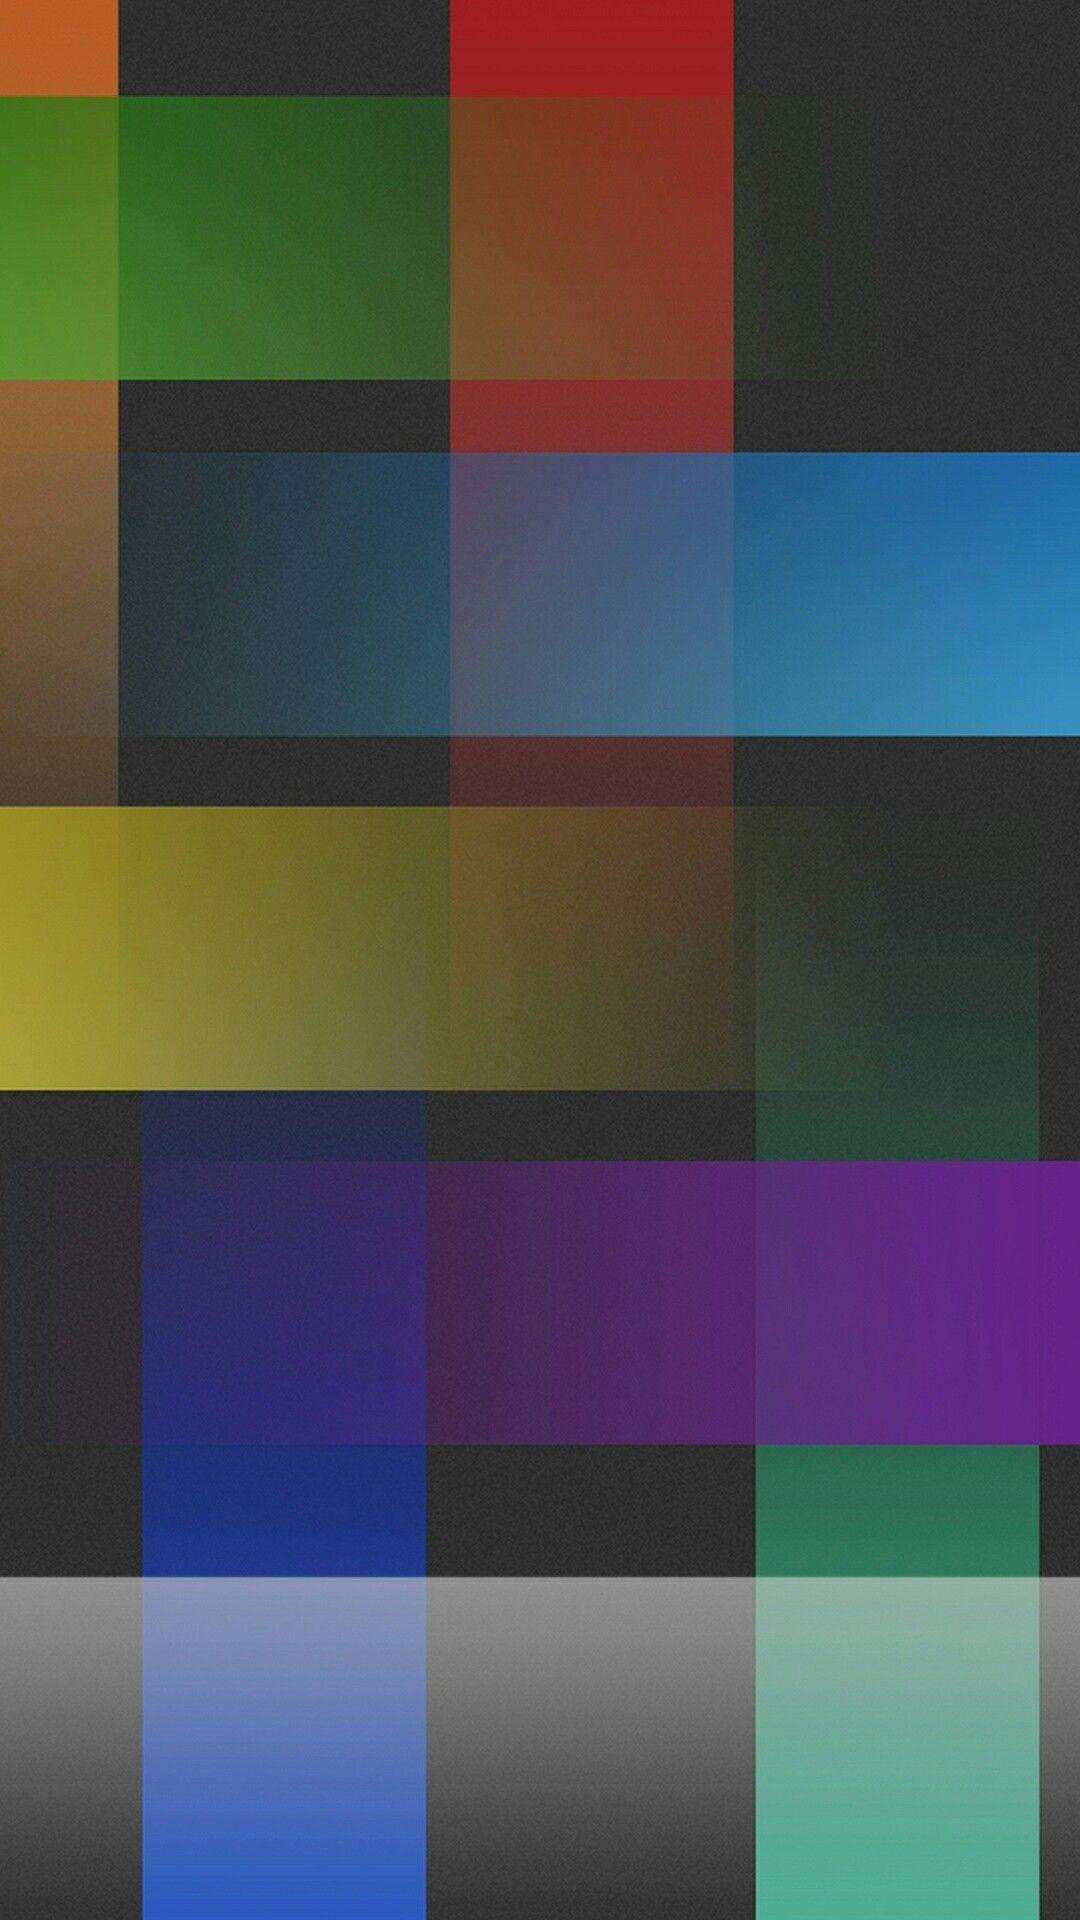 Colorful Gradient Wallpaper. *Abstract and Geometric Wallpaper